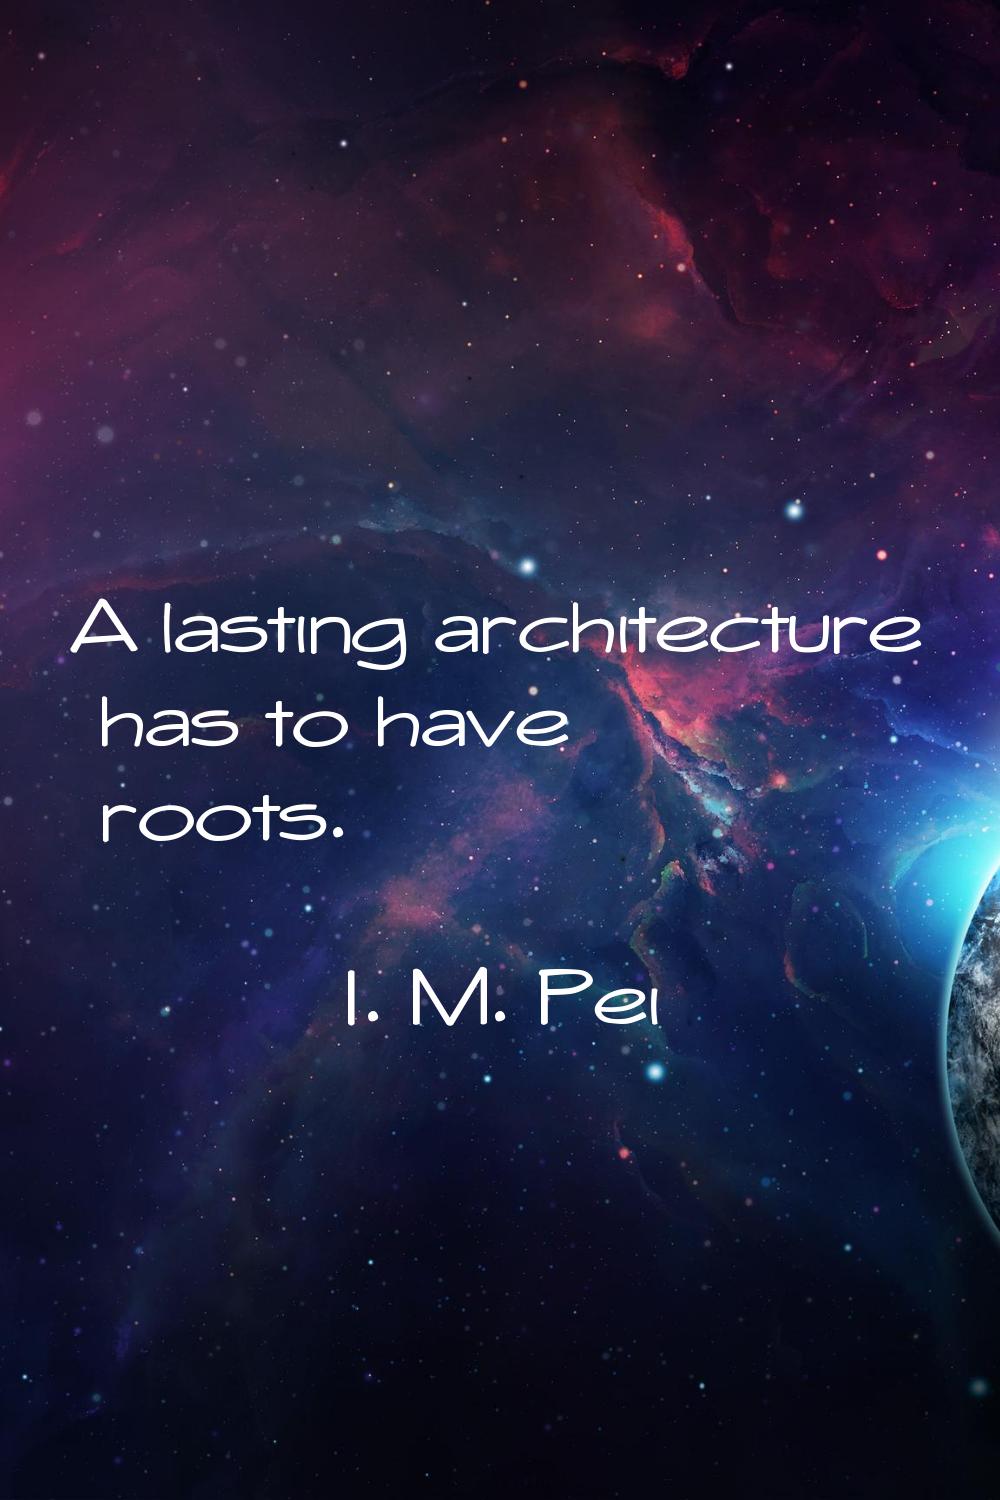 A lasting architecture has to have roots.